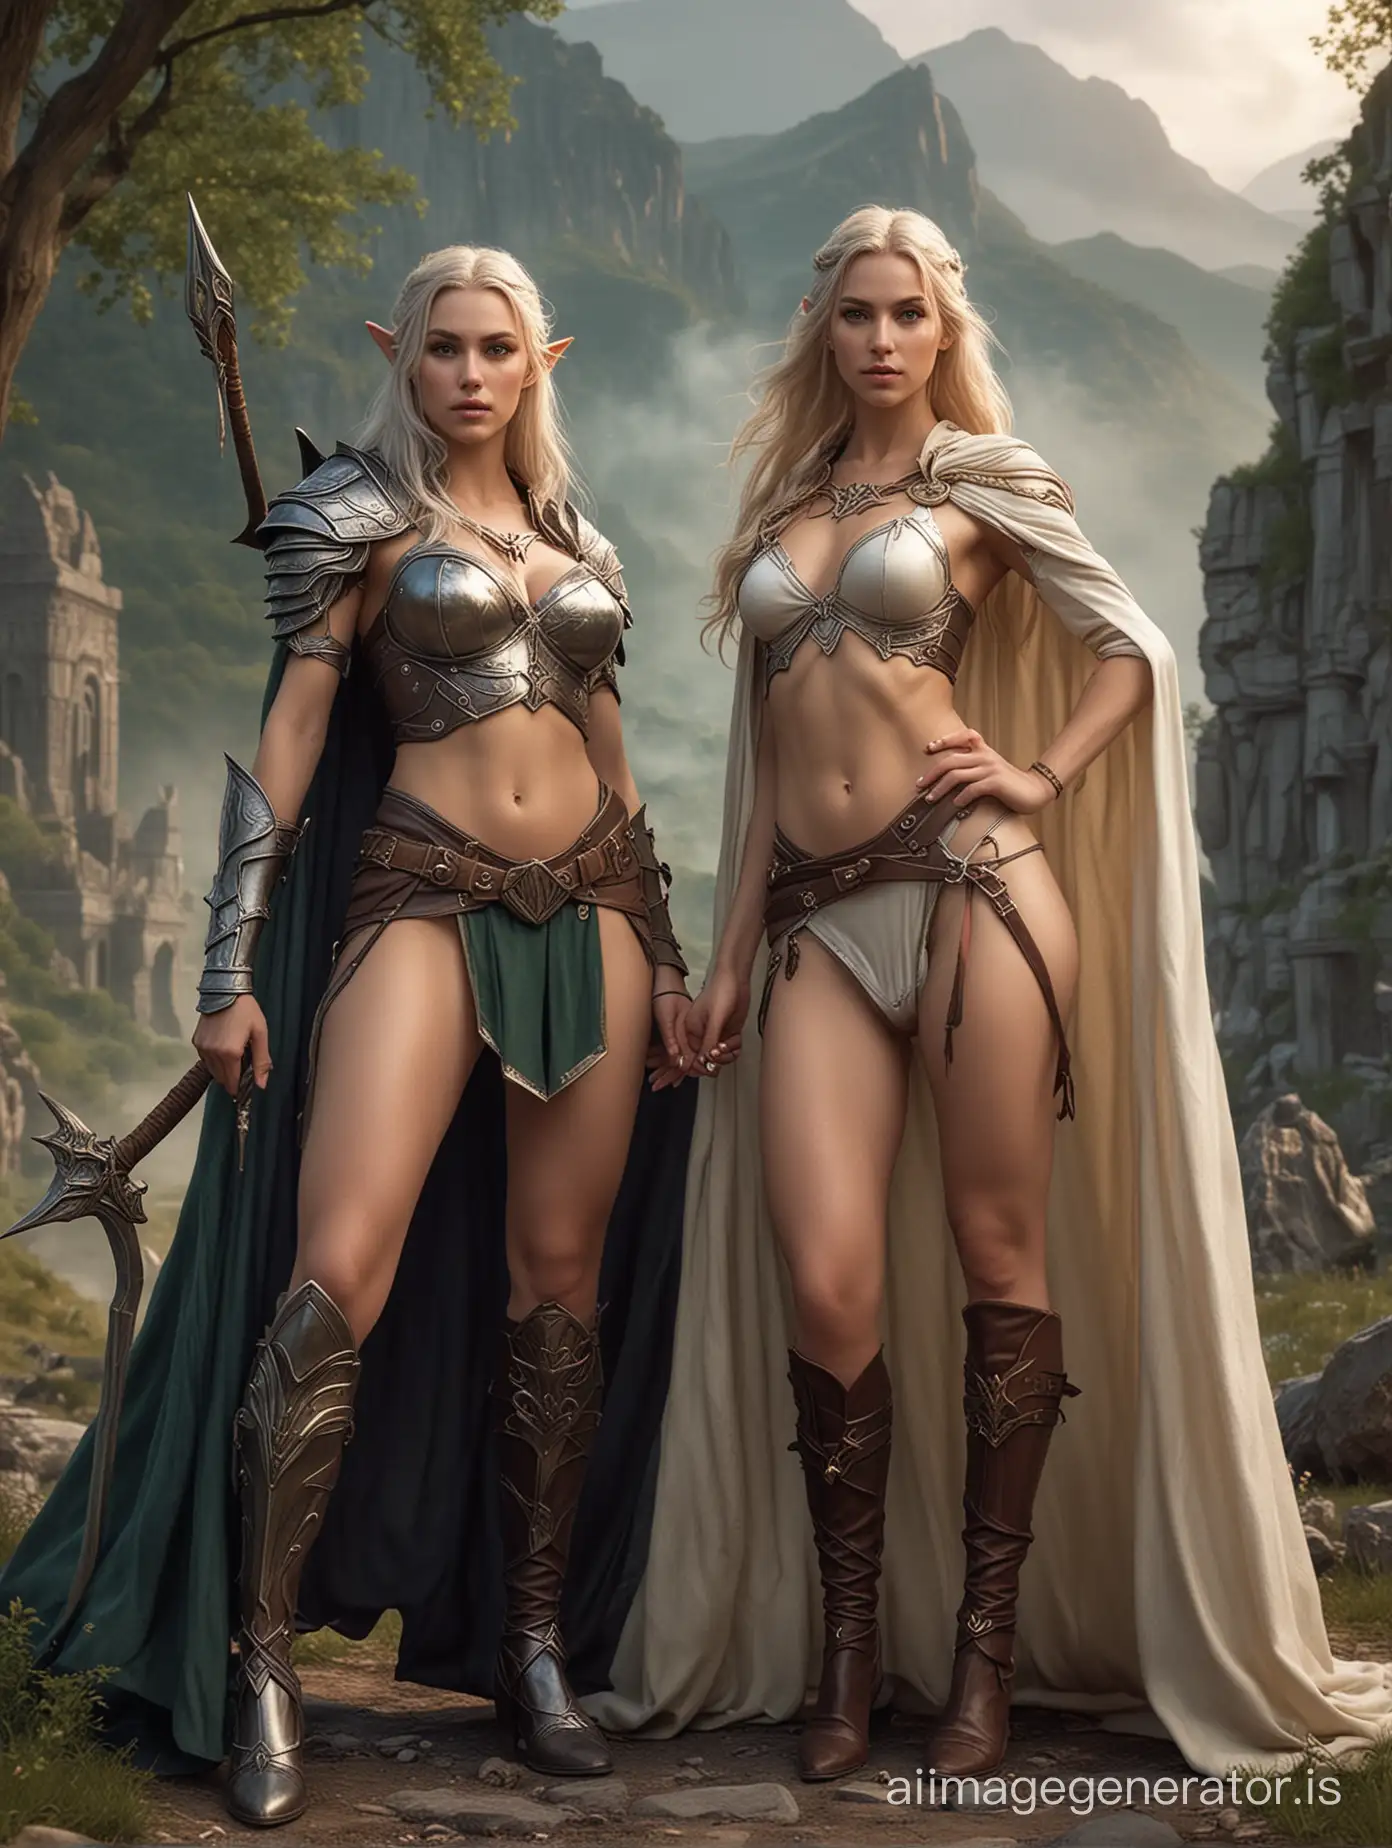 the female elven warrior and her female mage friend. Scantily dressed, fantasy setting. Almost nude. the battlefield behind them. no weapons. wizard wears a cape.